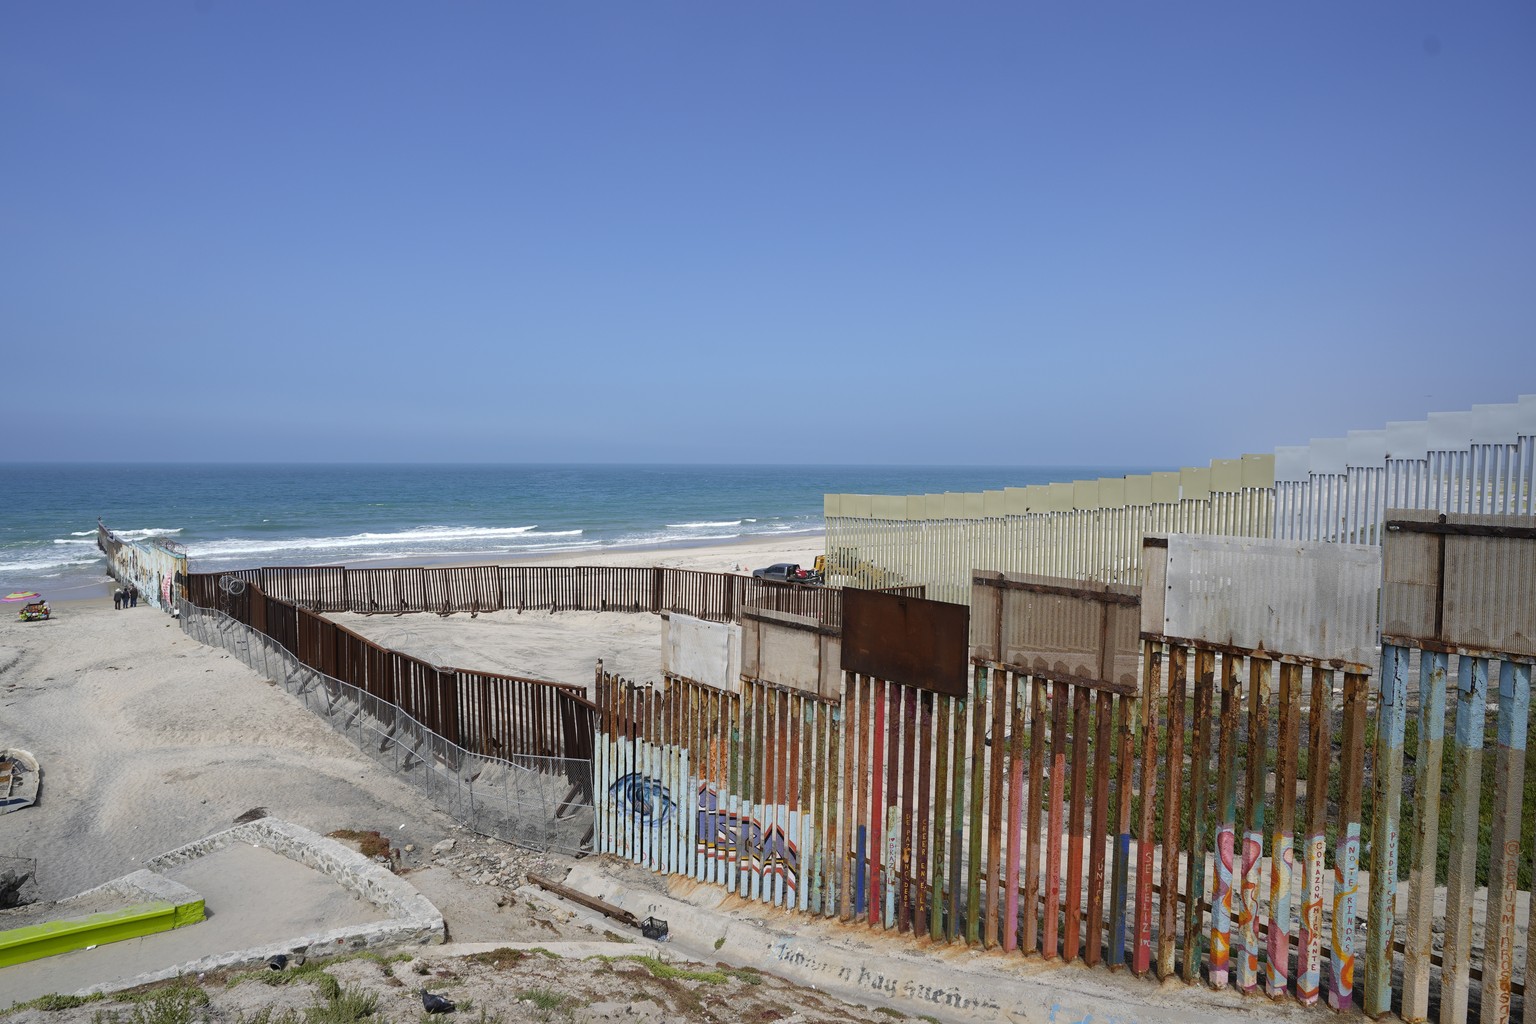 Construction continues on the border wall that separate the United States from Mexico, as seen from Tijuana, Mexico, Friday, Aug. 25, 2023. As the U.S. government built its latest stretch of border wa ...